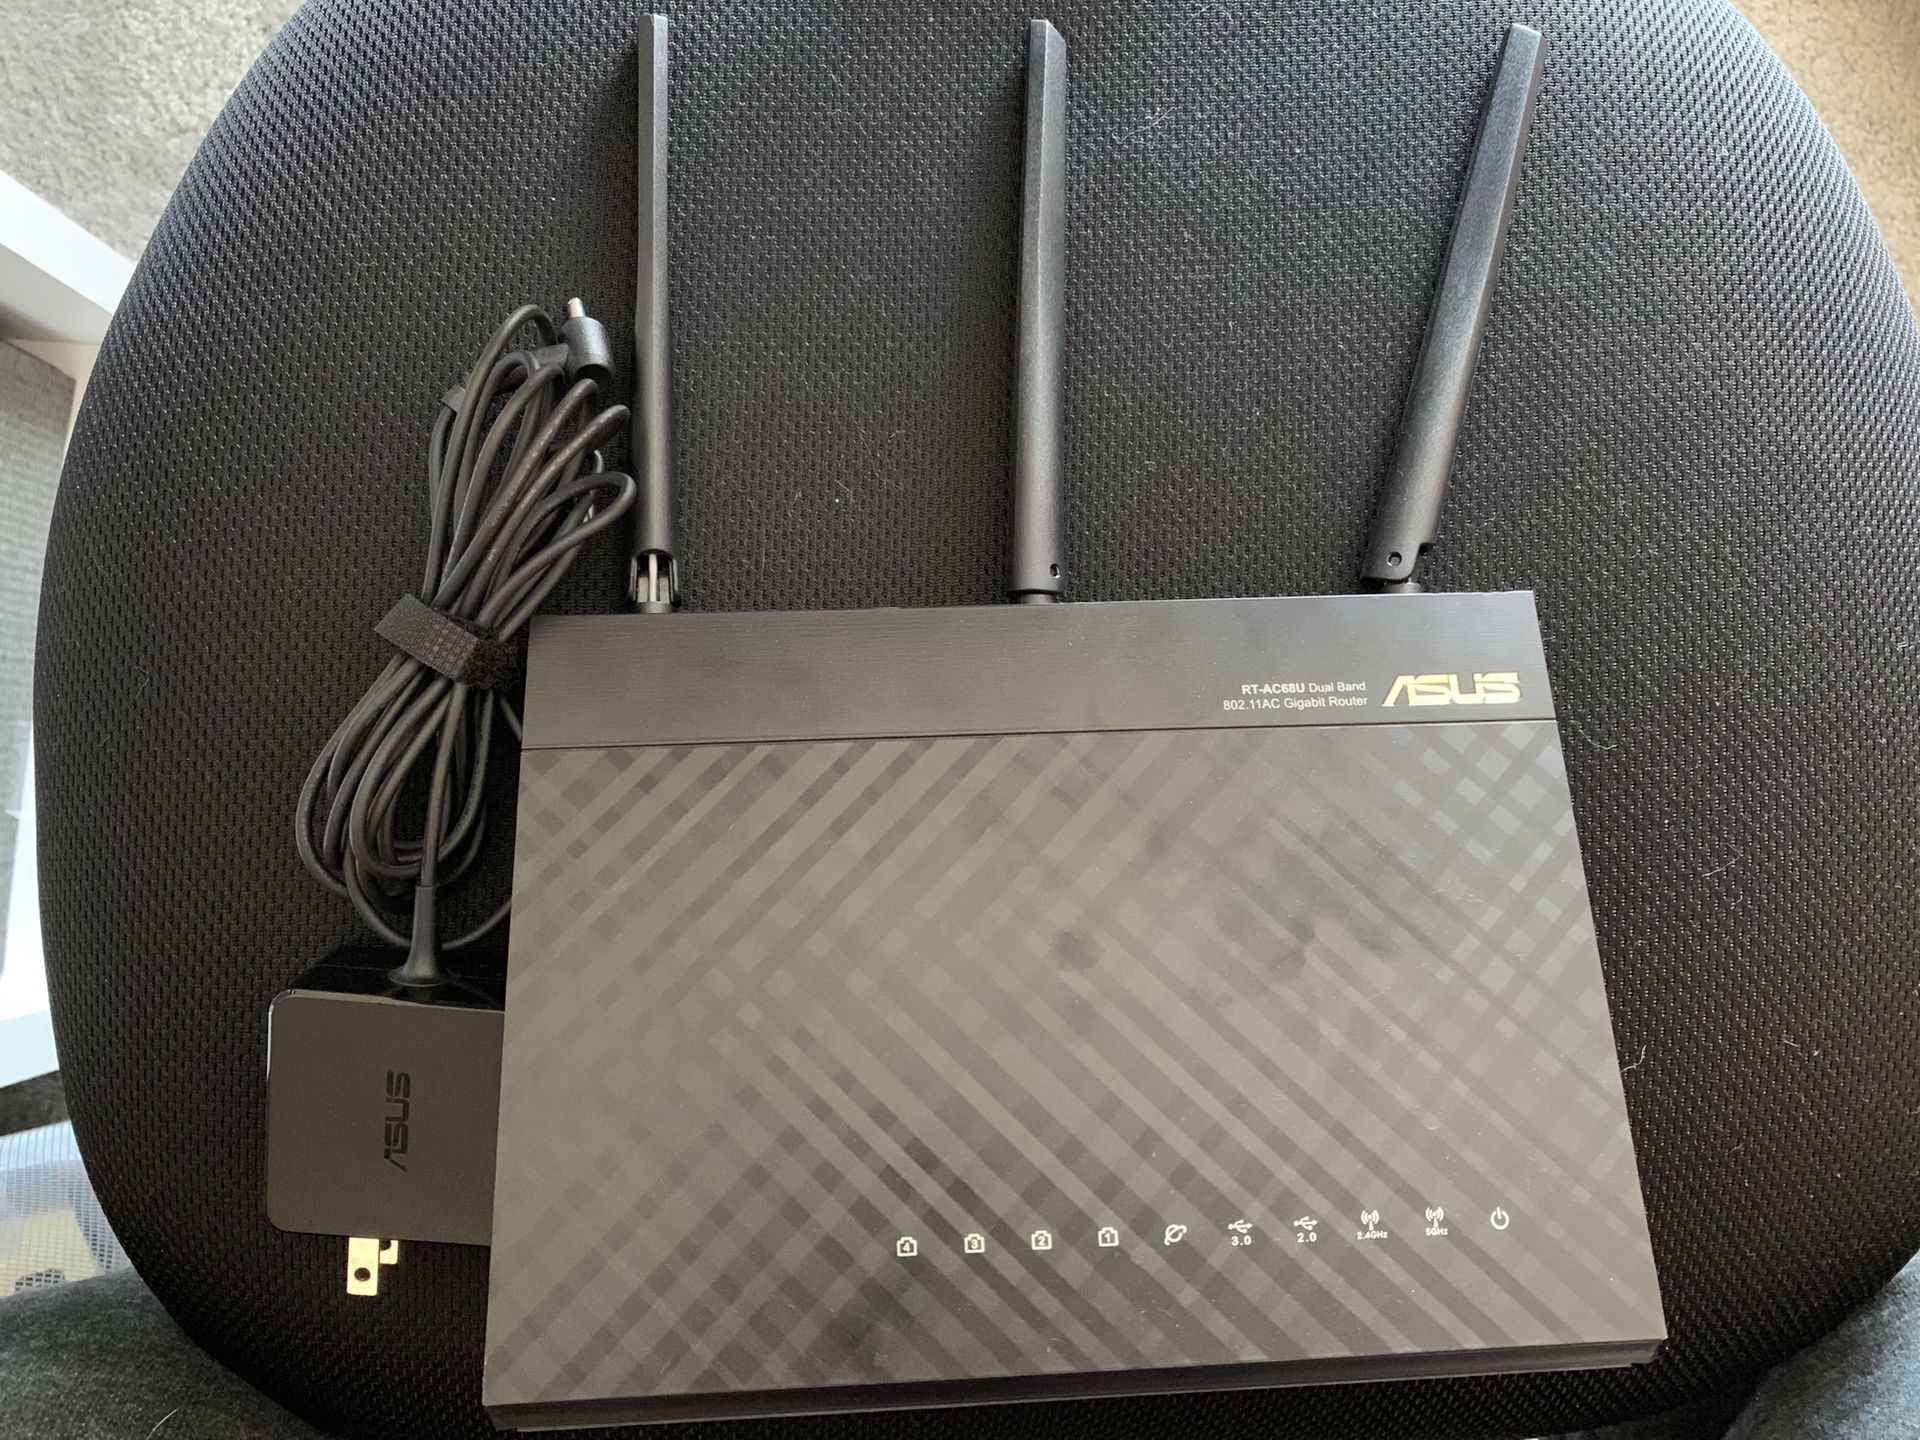 ASUS RT AC68u wireless router